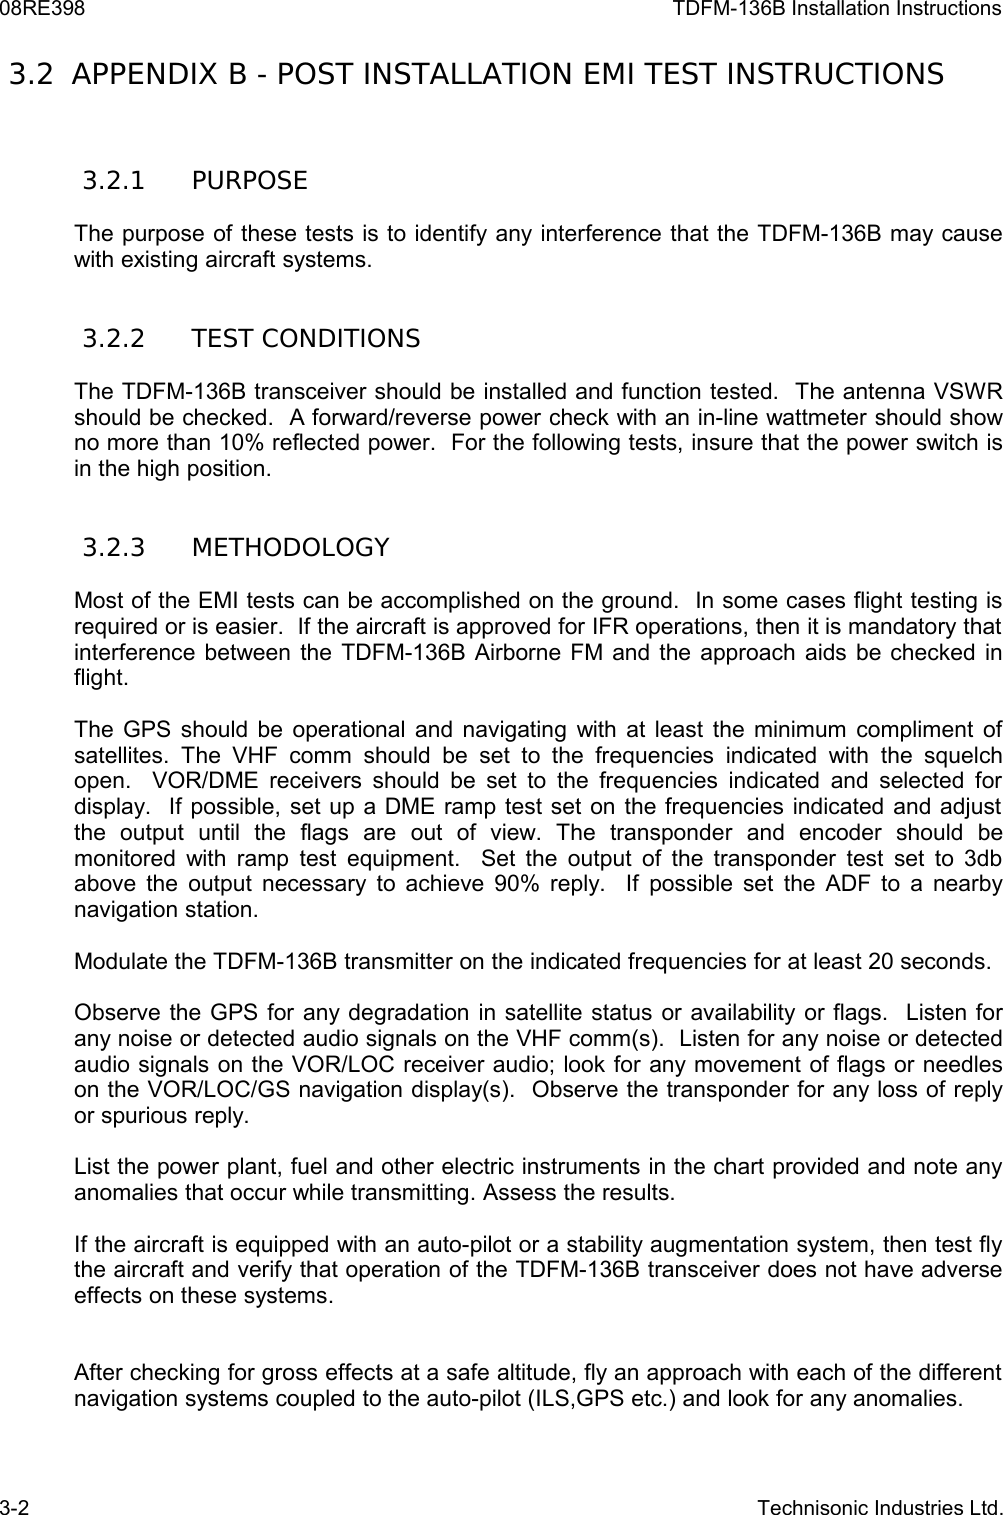 08RE398 TDFM-136B Installation Instructions 3.2  APPENDIX B - POST INSTALLATION EMI TEST INSTRUCTIONS 3.2.1  PURPOSEThe purpose of these tests is to identify any interference that the TDFM-136B may cause with existing aircraft systems. 3.2.2  TEST CONDITIONSThe TDFM-136B transceiver should be installed and function tested.  The antenna VSWR should be checked.  A forward/reverse power check with an in-line wattmeter should show no more than 10% reflected power.  For the following tests, insure that the power switch is in the high position. 3.2.3  METHODOLOGYMost of the EMI tests can be accomplished on the ground.  In some cases flight testing is required or is easier.  If the aircraft is approved for IFR operations, then it is mandatory that interference between the TDFM-136B Airborne FM and the approach aids be checked in flight.The GPS should be operational and navigating with at least the minimum compliment of satellites. The  VHF  comm  should be set   to  the frequencies indicated with  the squelch open.   VOR/DME receivers should be set to the frequencies indicated and selected for display.  If possible, set up a DME ramp test set on the frequencies indicated and adjust  the   output   until   the   flags   are   out   of   view.   The   transponder   and   encoder   should   be monitored with ramp test equipment.   Set the output of the transponder test set to 3db above the output necessary to achieve 90% reply.   If possible set the ADF to a nearby navigation station.Modulate the TDFM-136B transmitter on the indicated frequencies for at least 20 seconds.Observe the GPS for any degradation in satellite status or availability or flags.  Listen for any noise or detected audio signals on the VHF comm(s).  Listen for any noise or detected audio signals on the VOR/LOC receiver audio; look for any movement of flags or needles on the VOR/LOC/GS navigation display(s).  Observe the transponder for any loss of reply or spurious reply.List the power plant, fuel and other electric instruments in the chart provided and note any anomalies that occur while transmitting. Assess the results.If the aircraft is equipped with an auto-pilot or a stability augmentation system, then test fly the aircraft and verify that operation of the TDFM-136B transceiver does not have adverse effects on these systems.After checking for gross effects at a safe altitude, fly an approach with each of the different navigation systems coupled to the auto-pilot (ILS,GPS etc.) and look for any anomalies.3-2 Technisonic Industries Ltd.